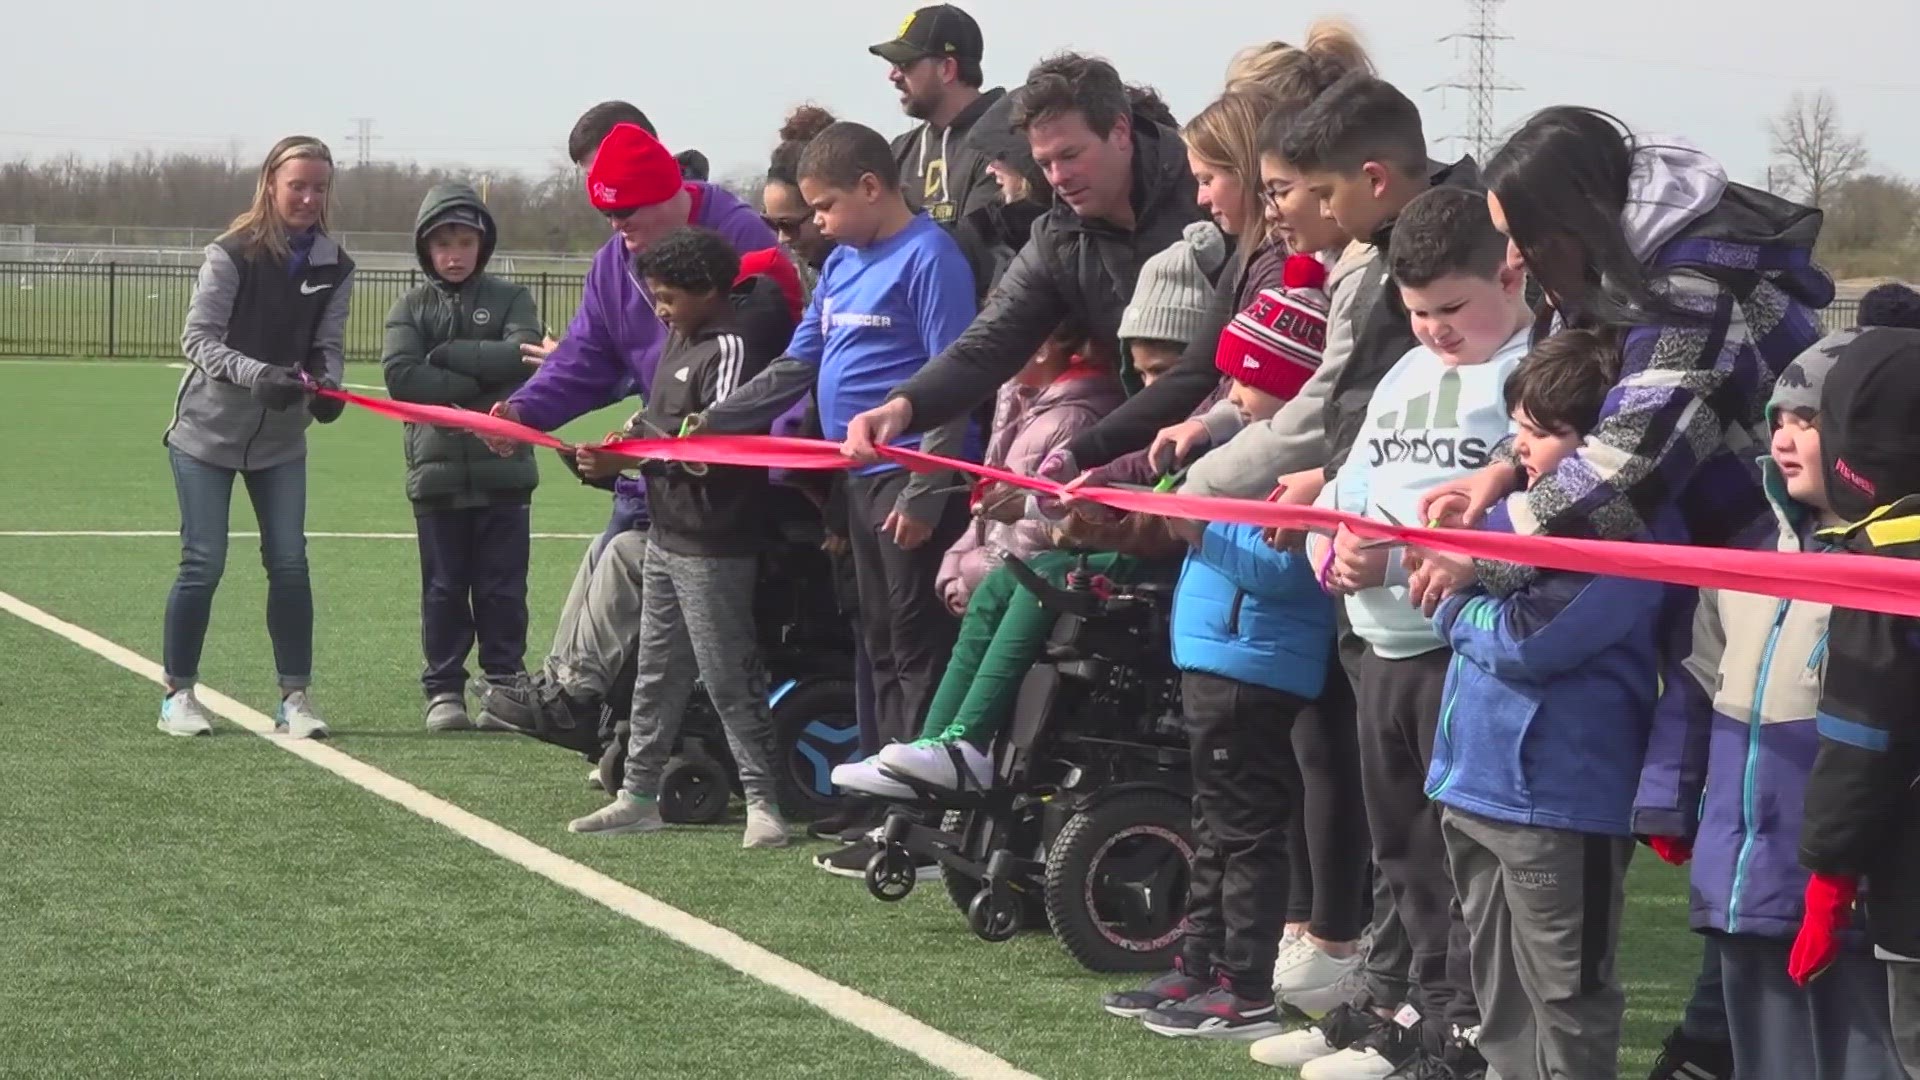 The One Field at the Galloway Sports Complex allows athletes of all abilities to play safely and without barriers.